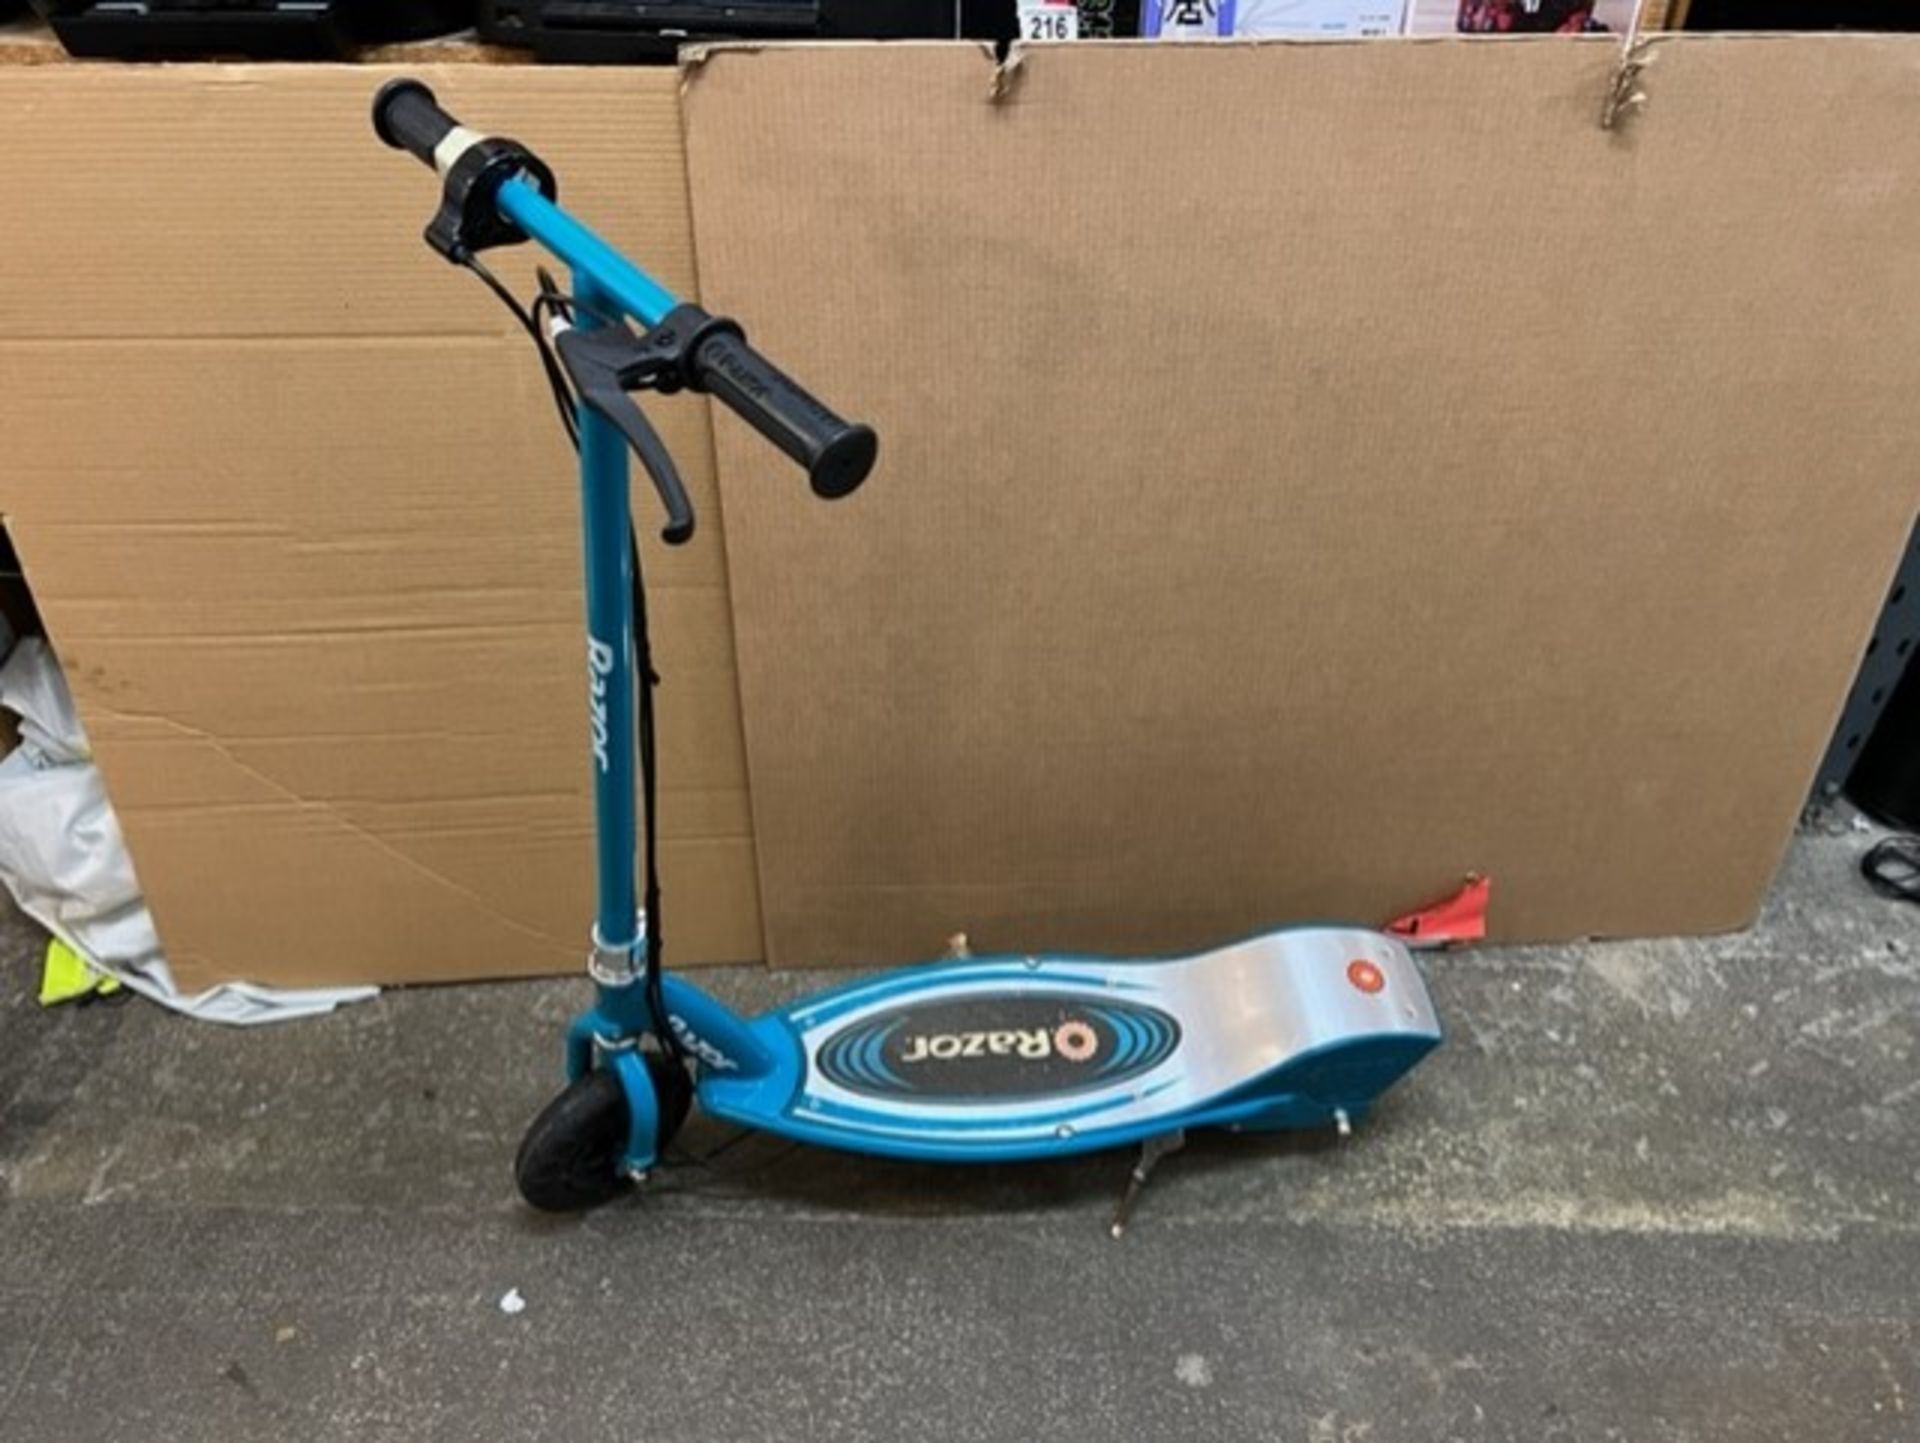 1 RAZOR POWER CORE E200 BLUE ELECTRIC SCOOTER RRP Â£299 (NO CHARGER)